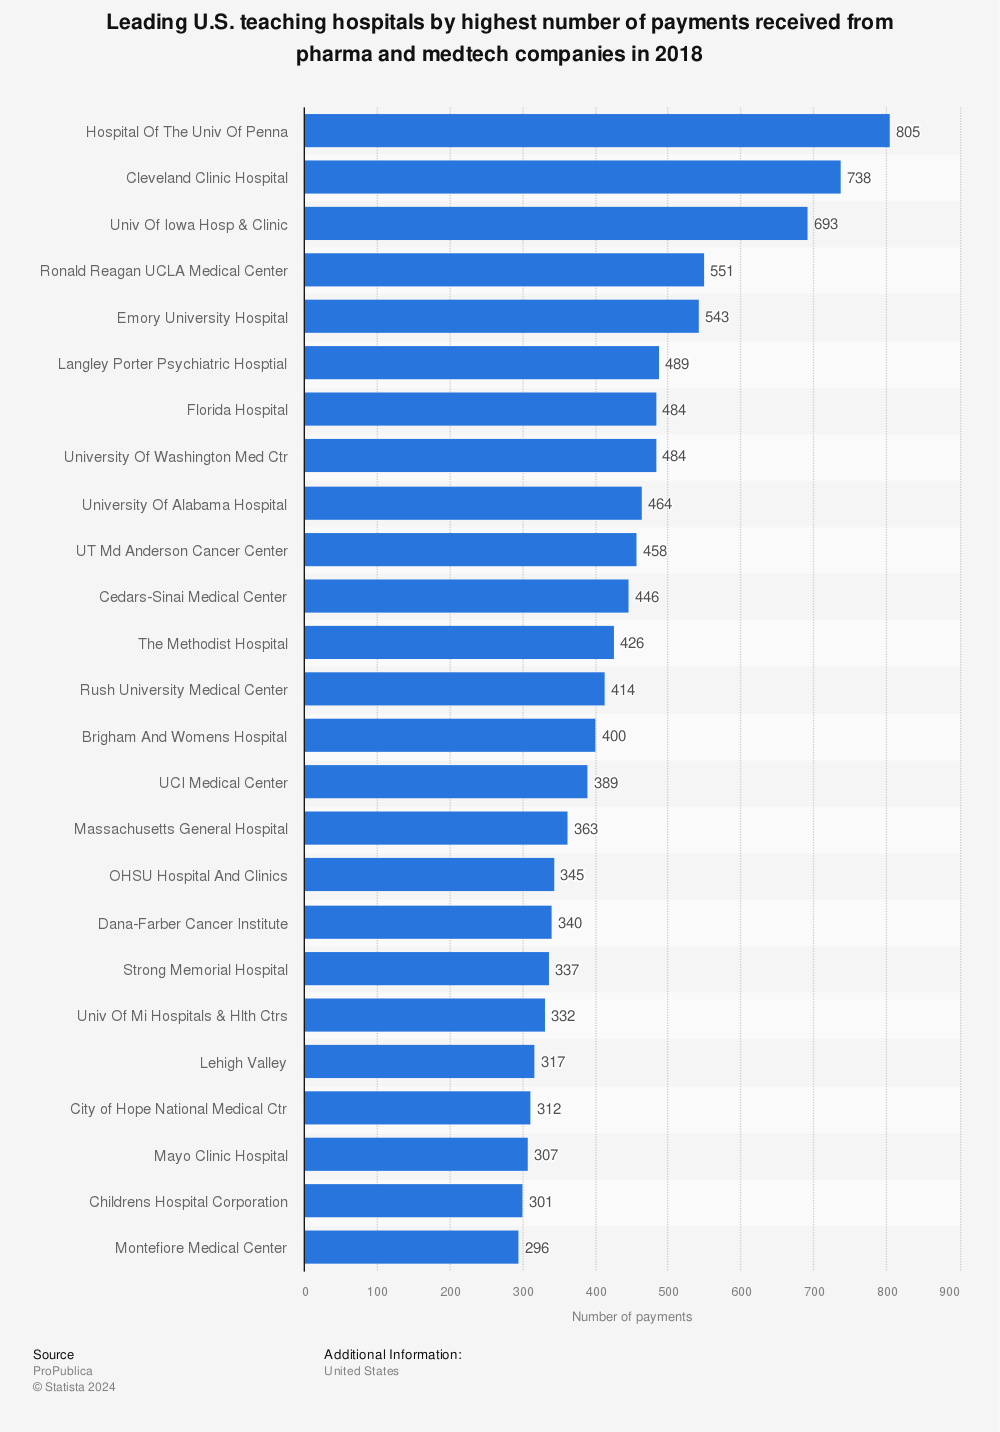 Statistic: Leading U.S. teaching hospitals by highest number of payments received from pharma and medtech companies in 2018 | Statista